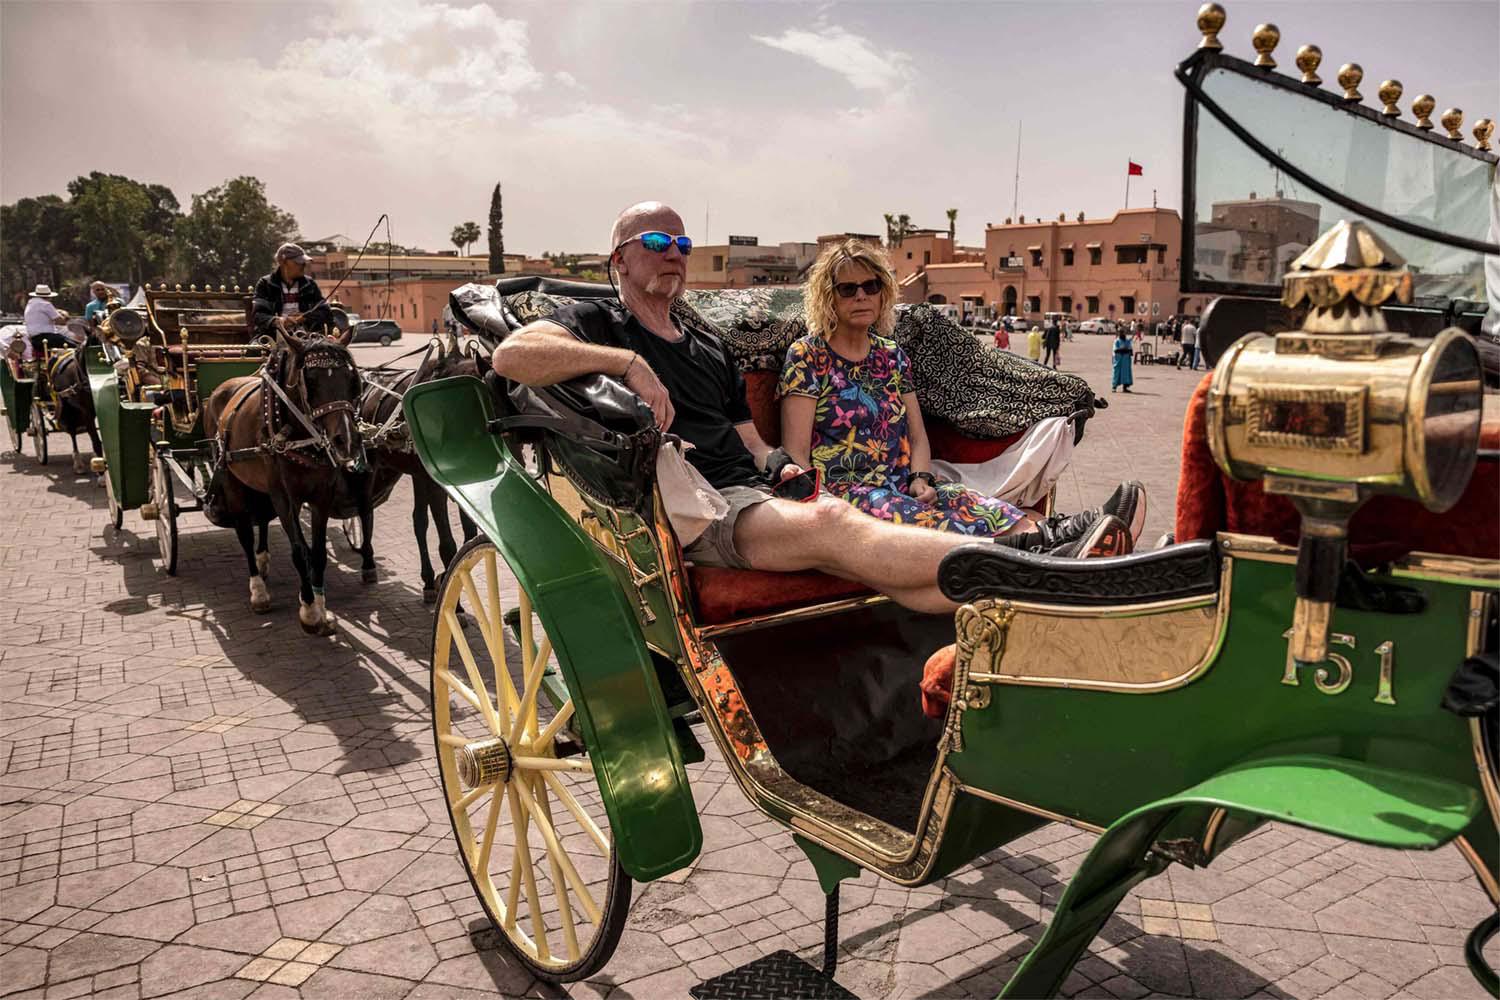 Morocco has managed to recover more than 76% of tourist arrivals after the COVID-19 pandemic